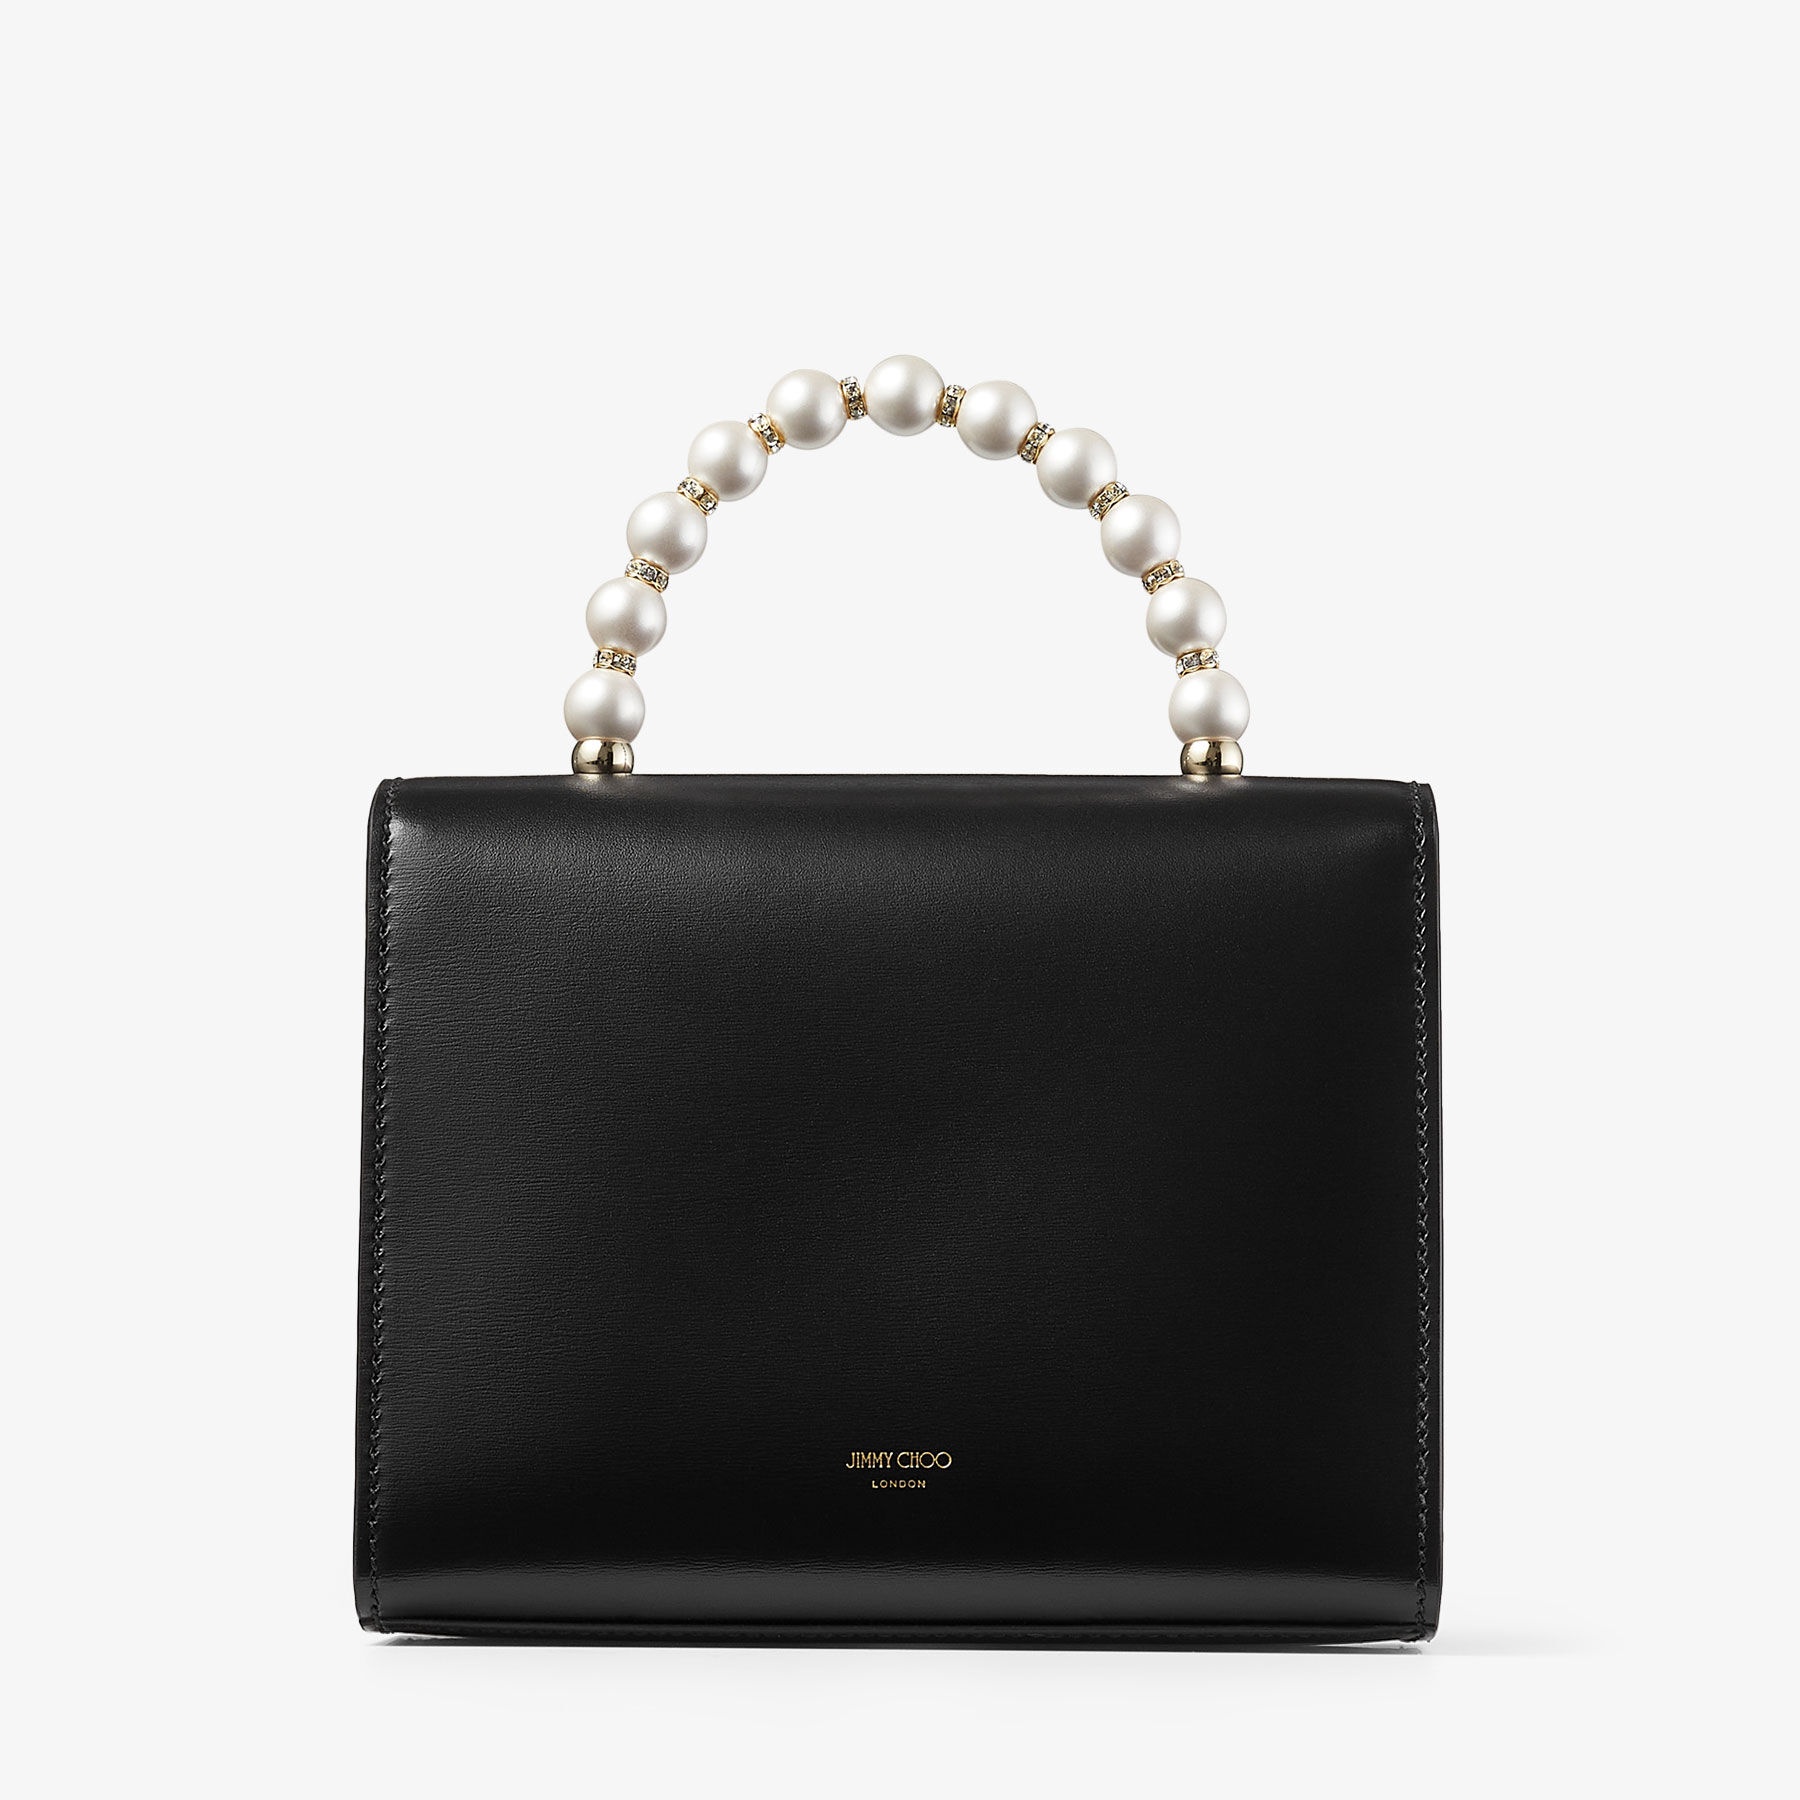 Avenue Top Handle/S
Black Box Leather Top Handle Bag with Pearls - 6